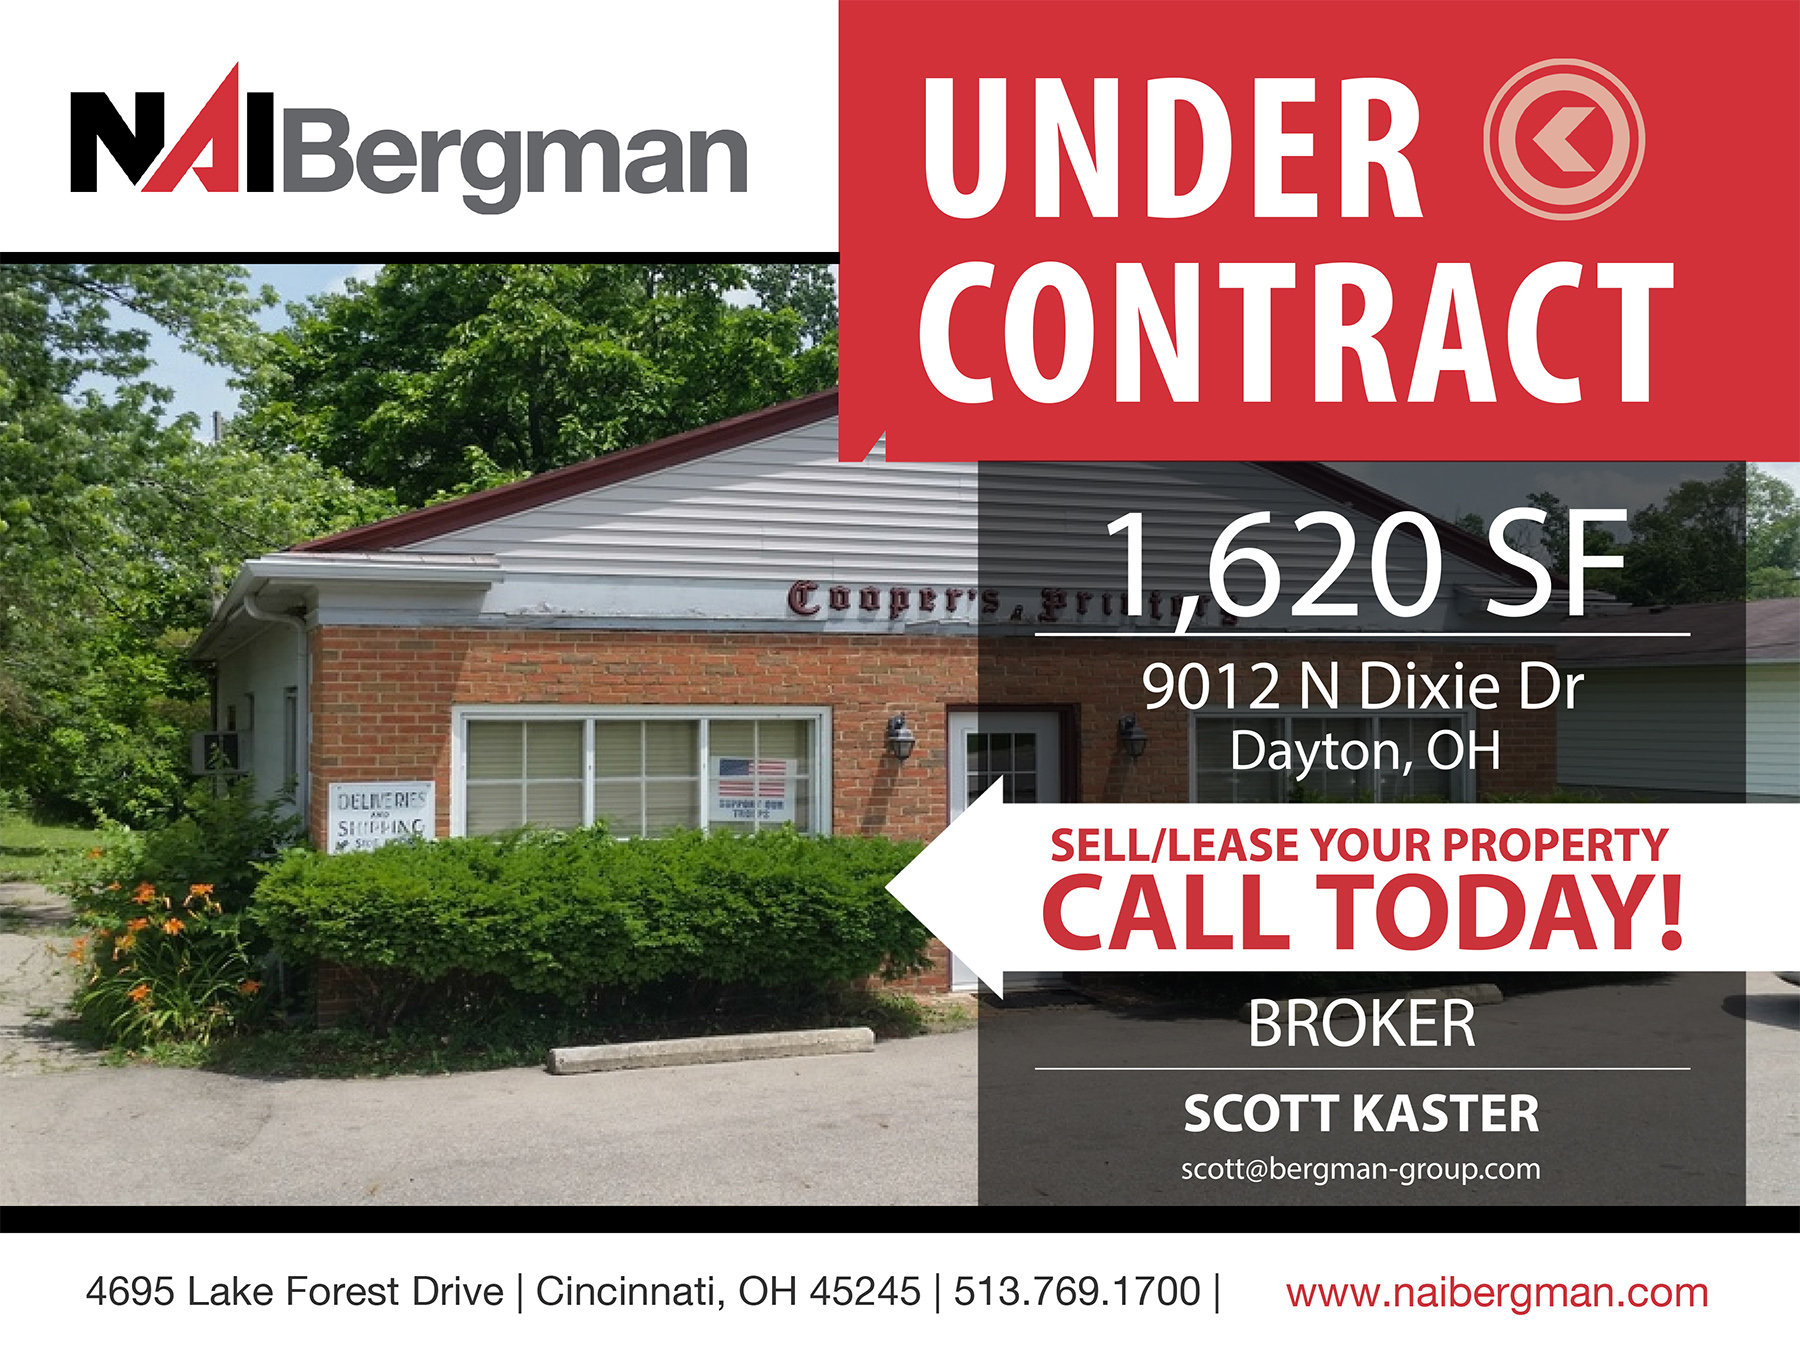 NAI Bergman, N Dixie, Noth Dixie, Scott Kaster,Leasing, Selling, Commercial Real Estate, CRE, Property Management, Cincinnati, Dayton, Office, Retail, Industrial, Medical, Land, Investment